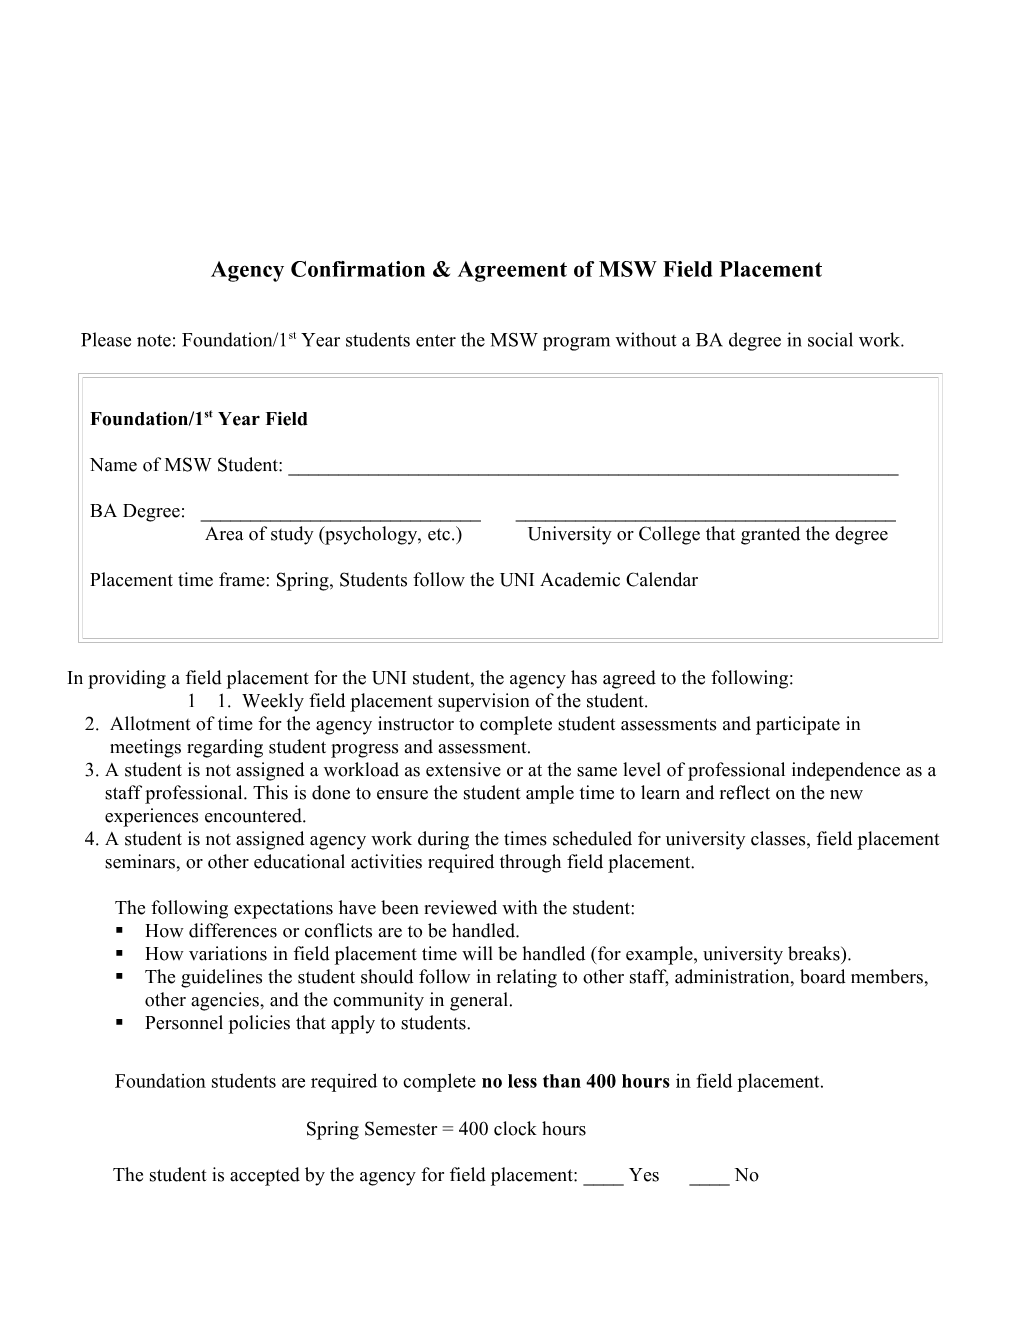 Agency Confirmation of MSW Practicum Placement